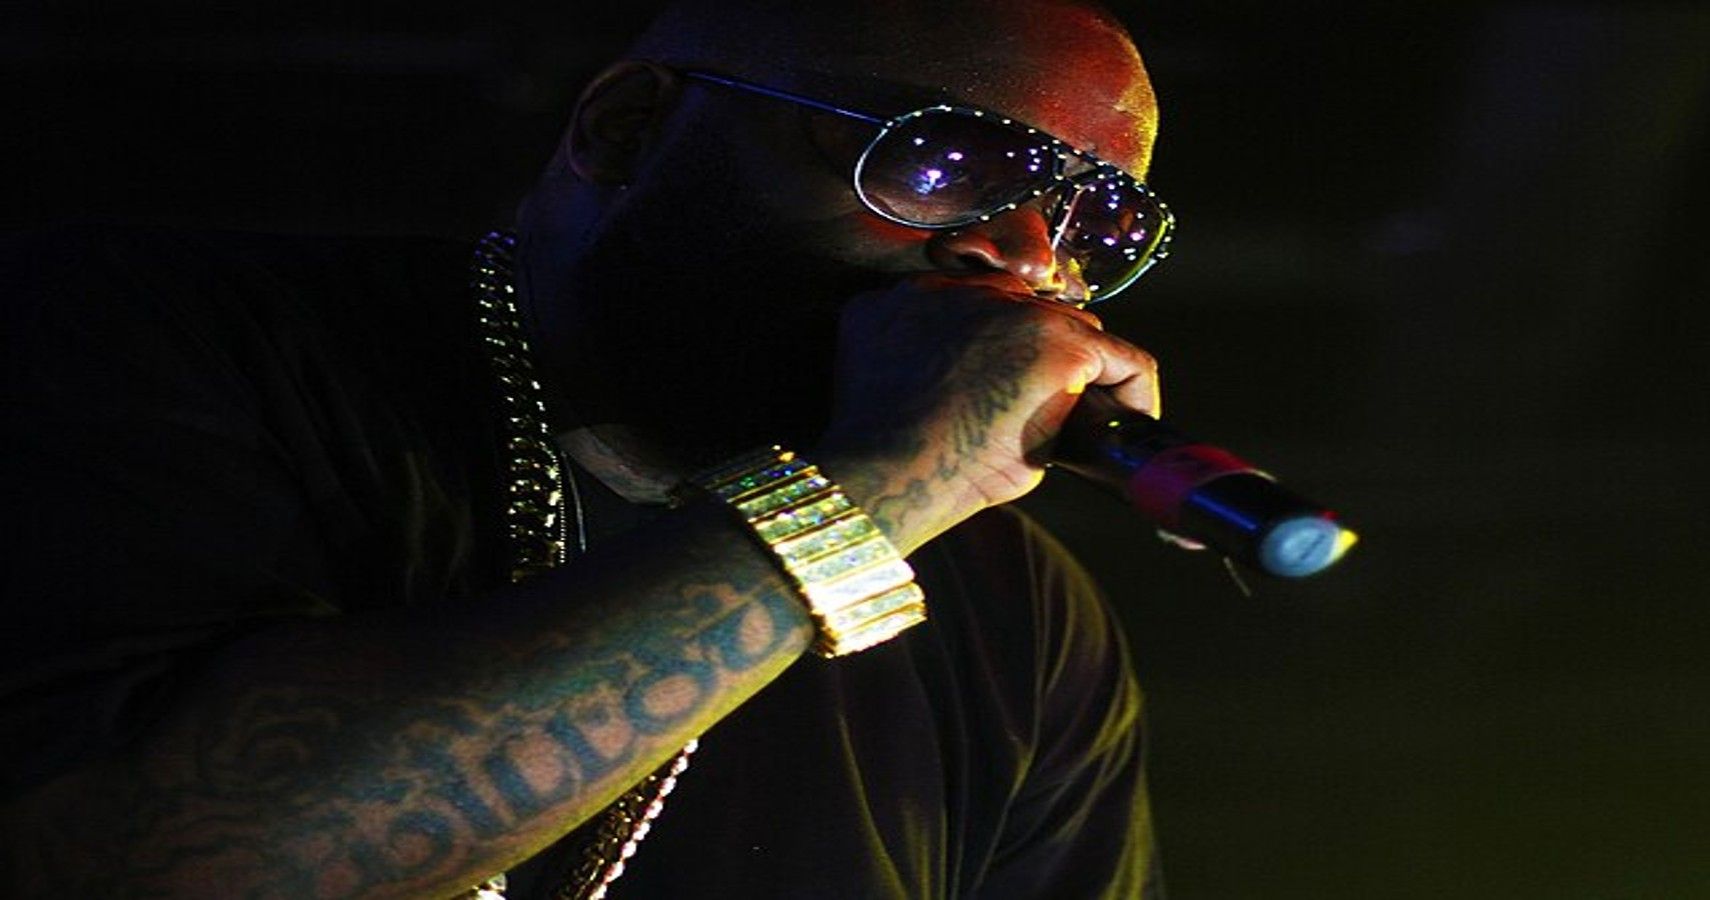 A Look At The Most Expensive Jewelry Inside Rick Ross' Collection